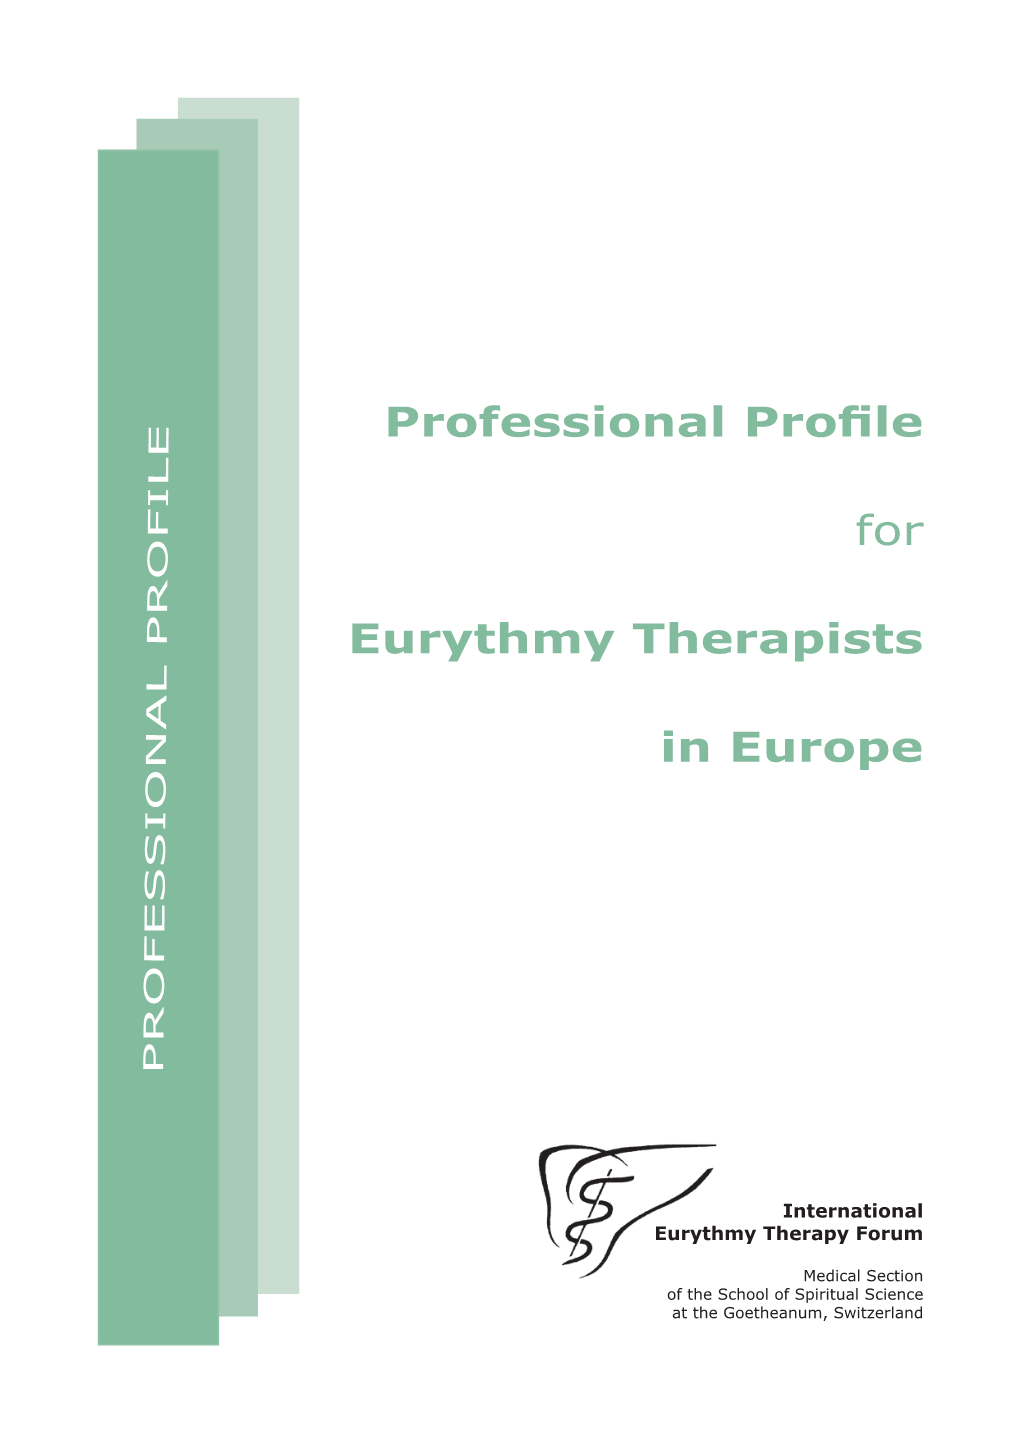 Professional Profile for Eurythmy Therapists in Europe